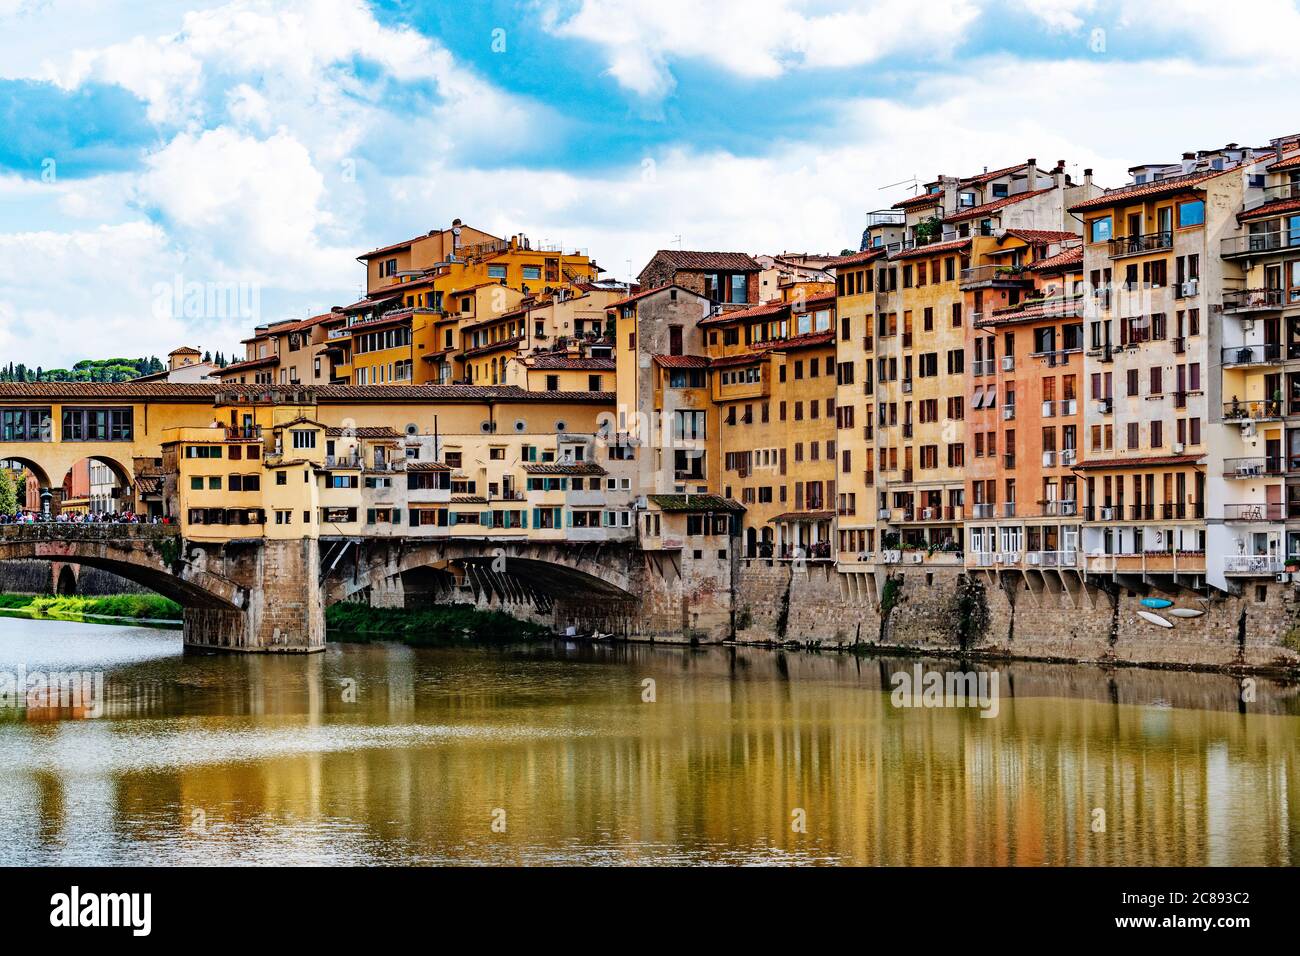 the famous historic ponte vecchio spans the river arno that runs through the city of florence in tuscany, italy. Stock Photo